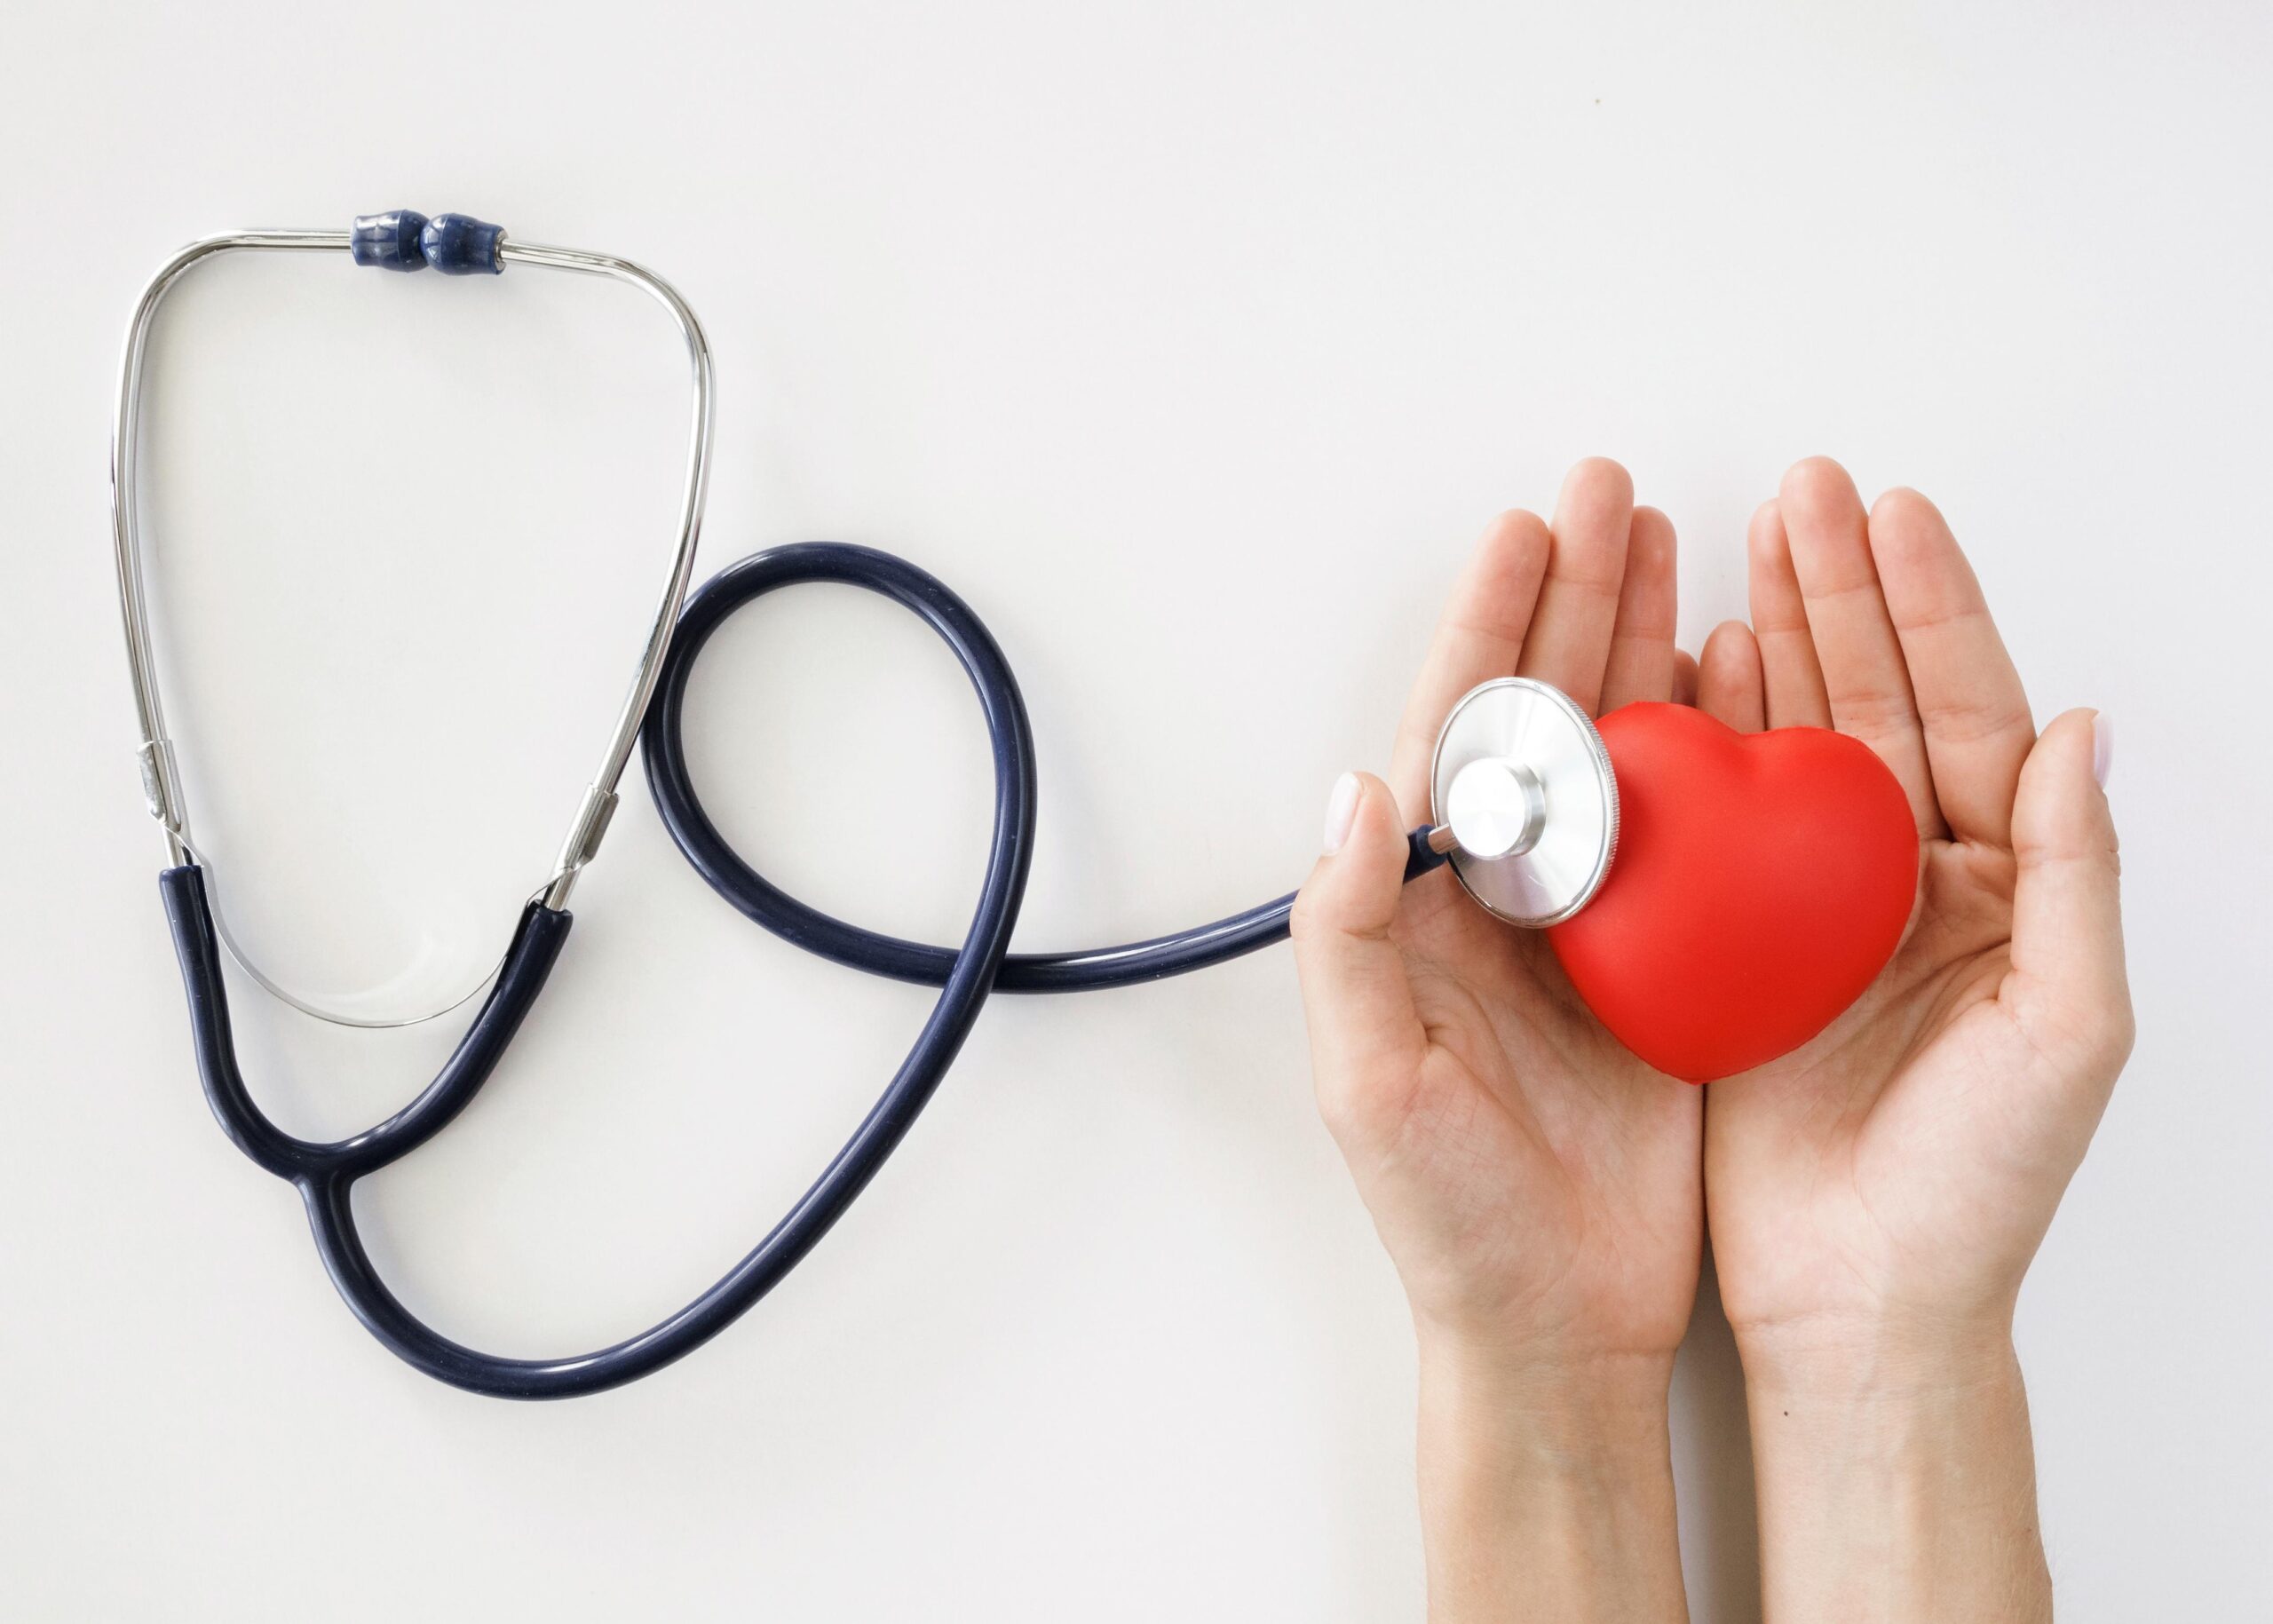 Hands holding a heart and a stethoscope